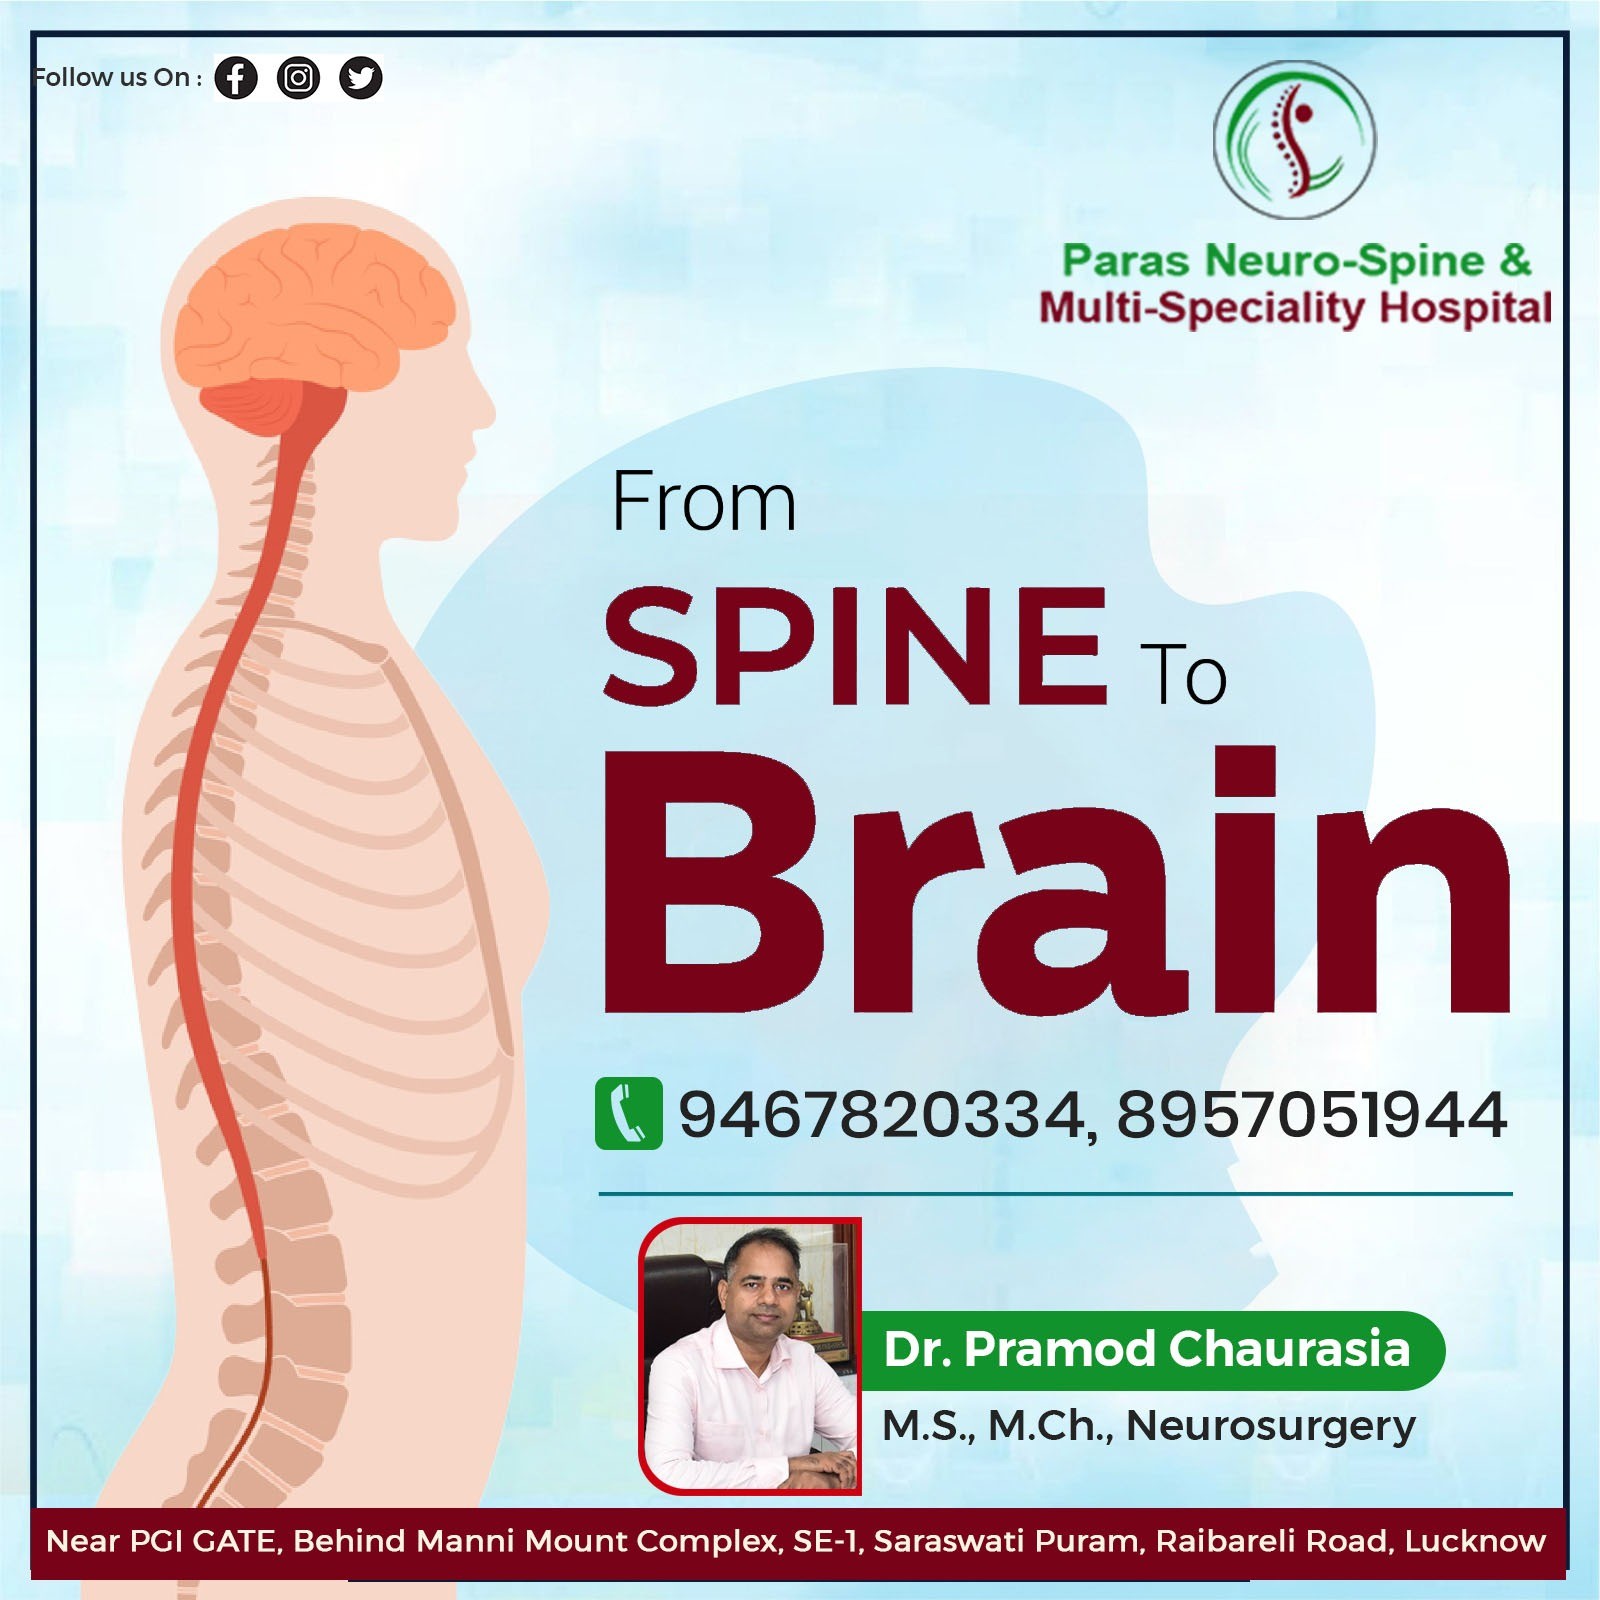 Best Neuro Spine Surgeon in Lucknow - Paras Neuro-Spine & Multi Speciality Hospital